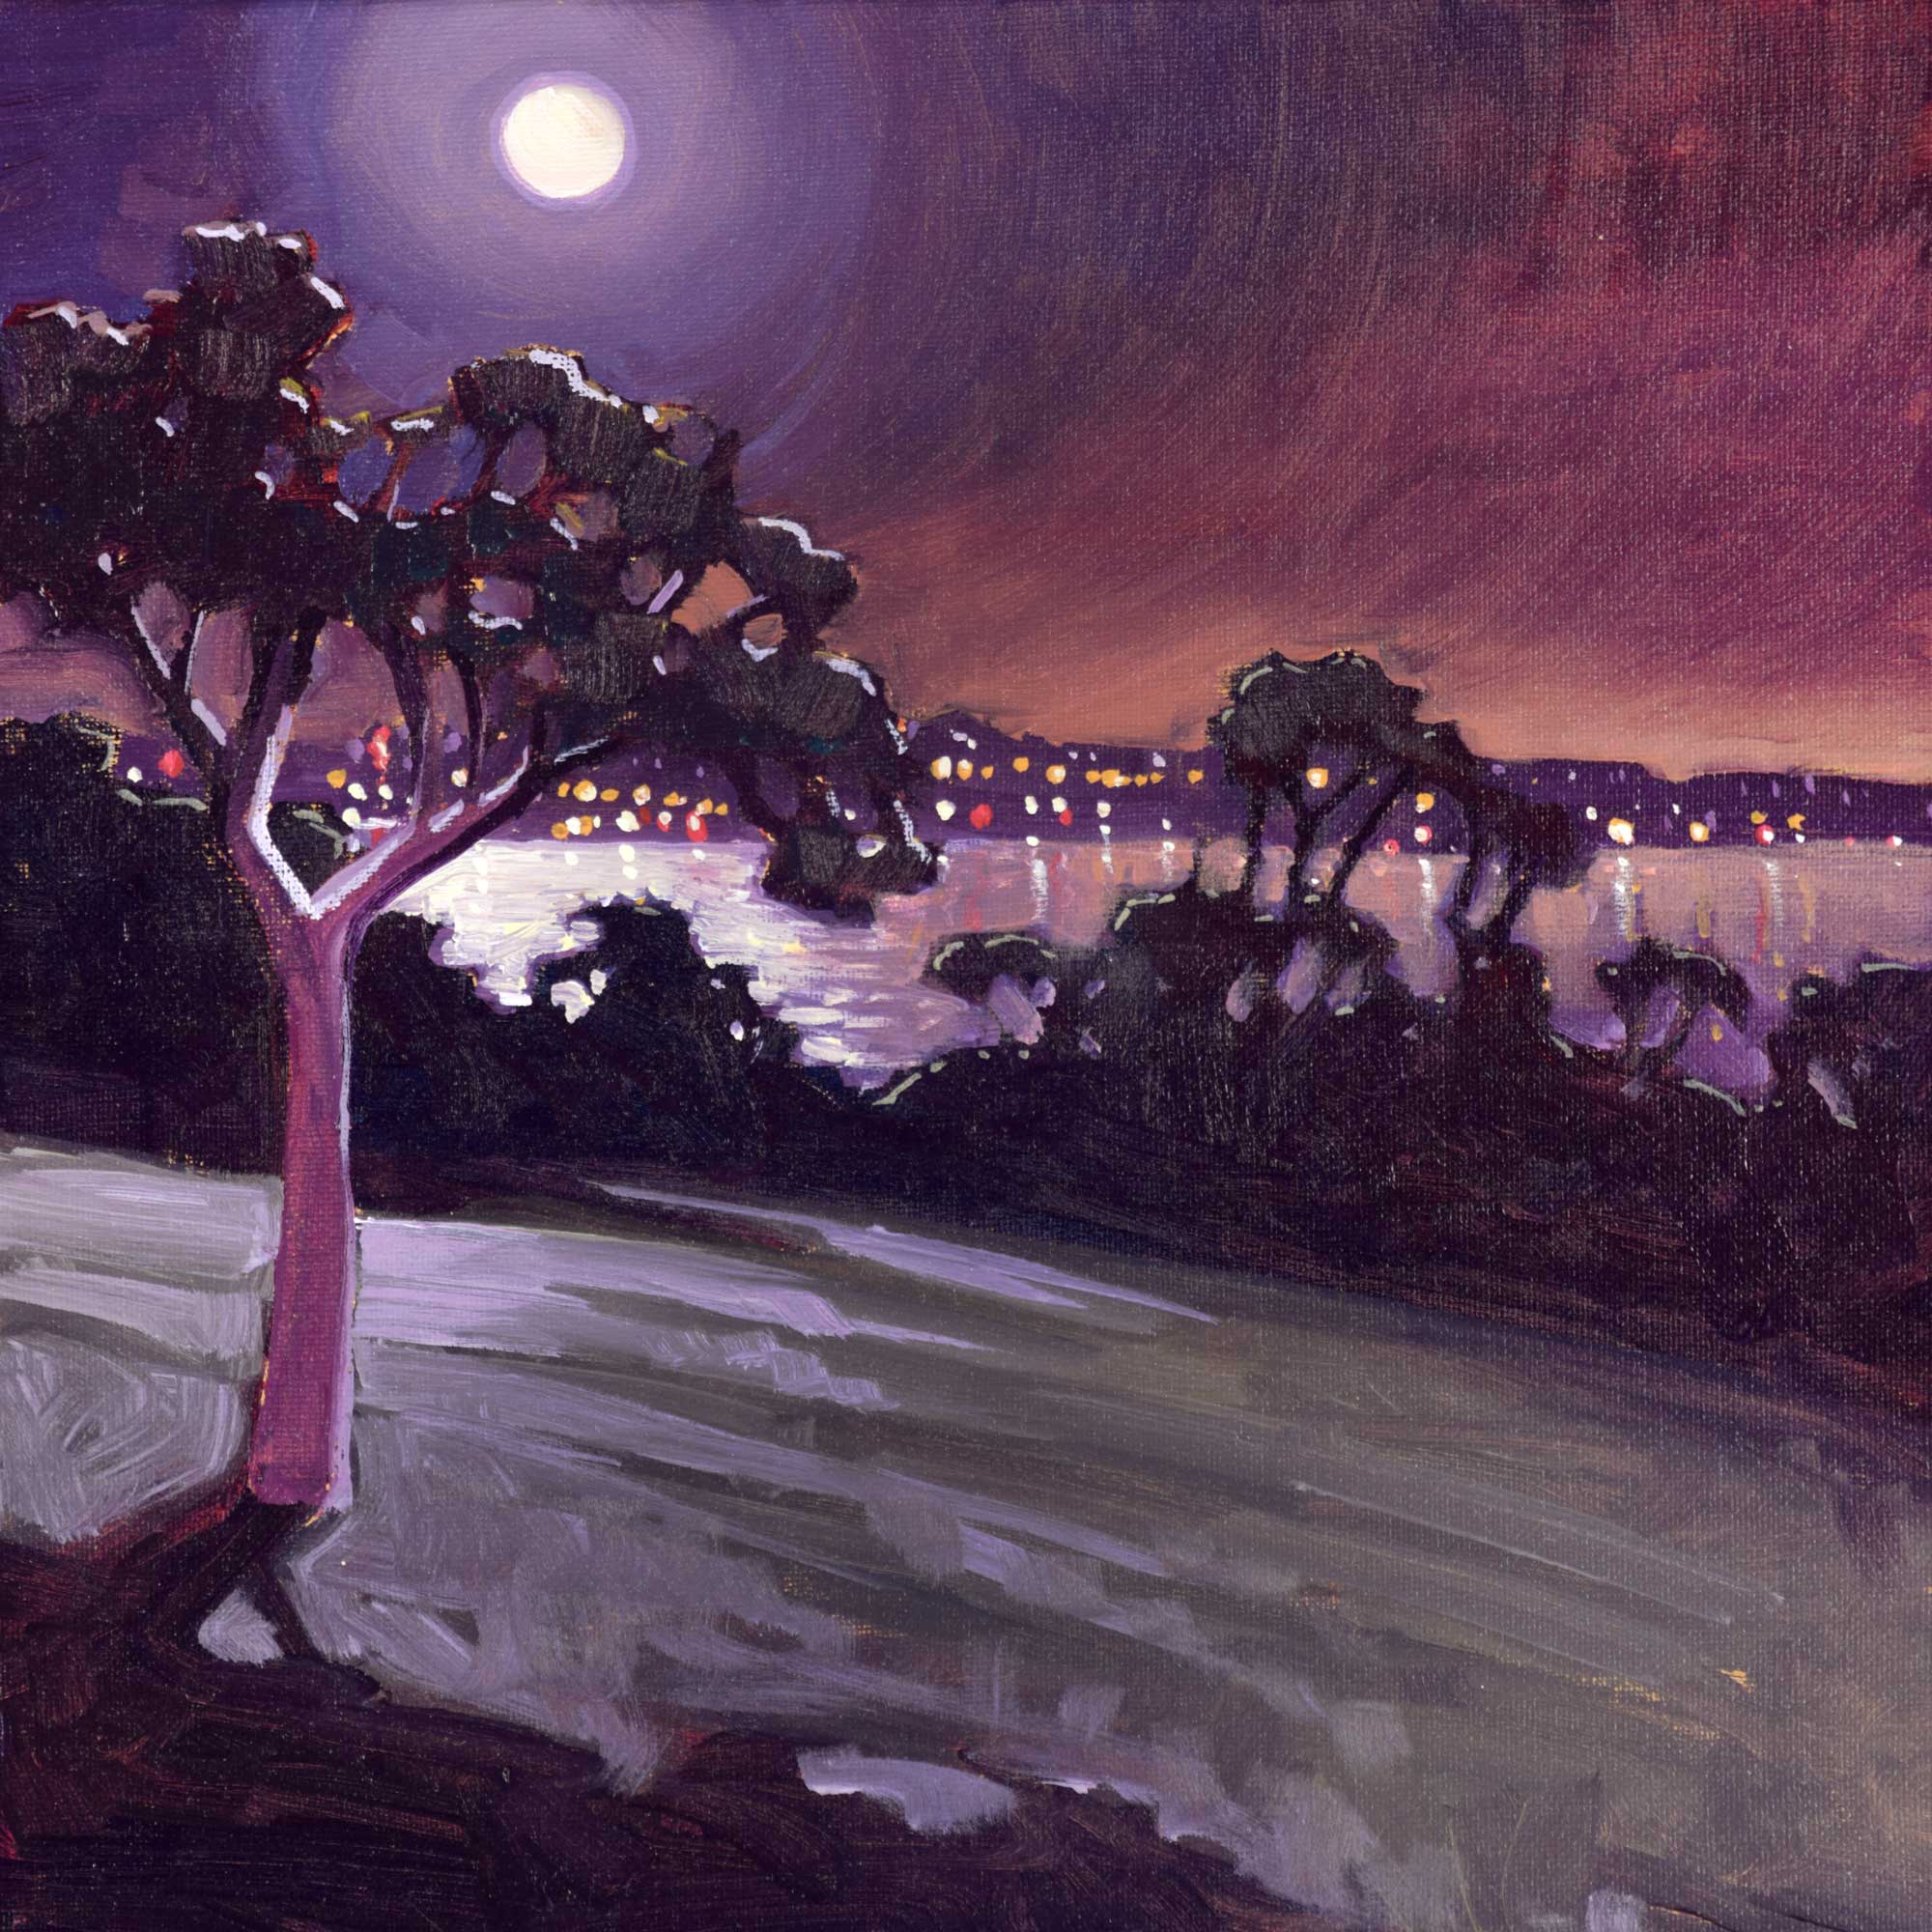 Plein air nocturne artwork of city lights over San Diego Harbor at Kate Sessions Park in San Diego